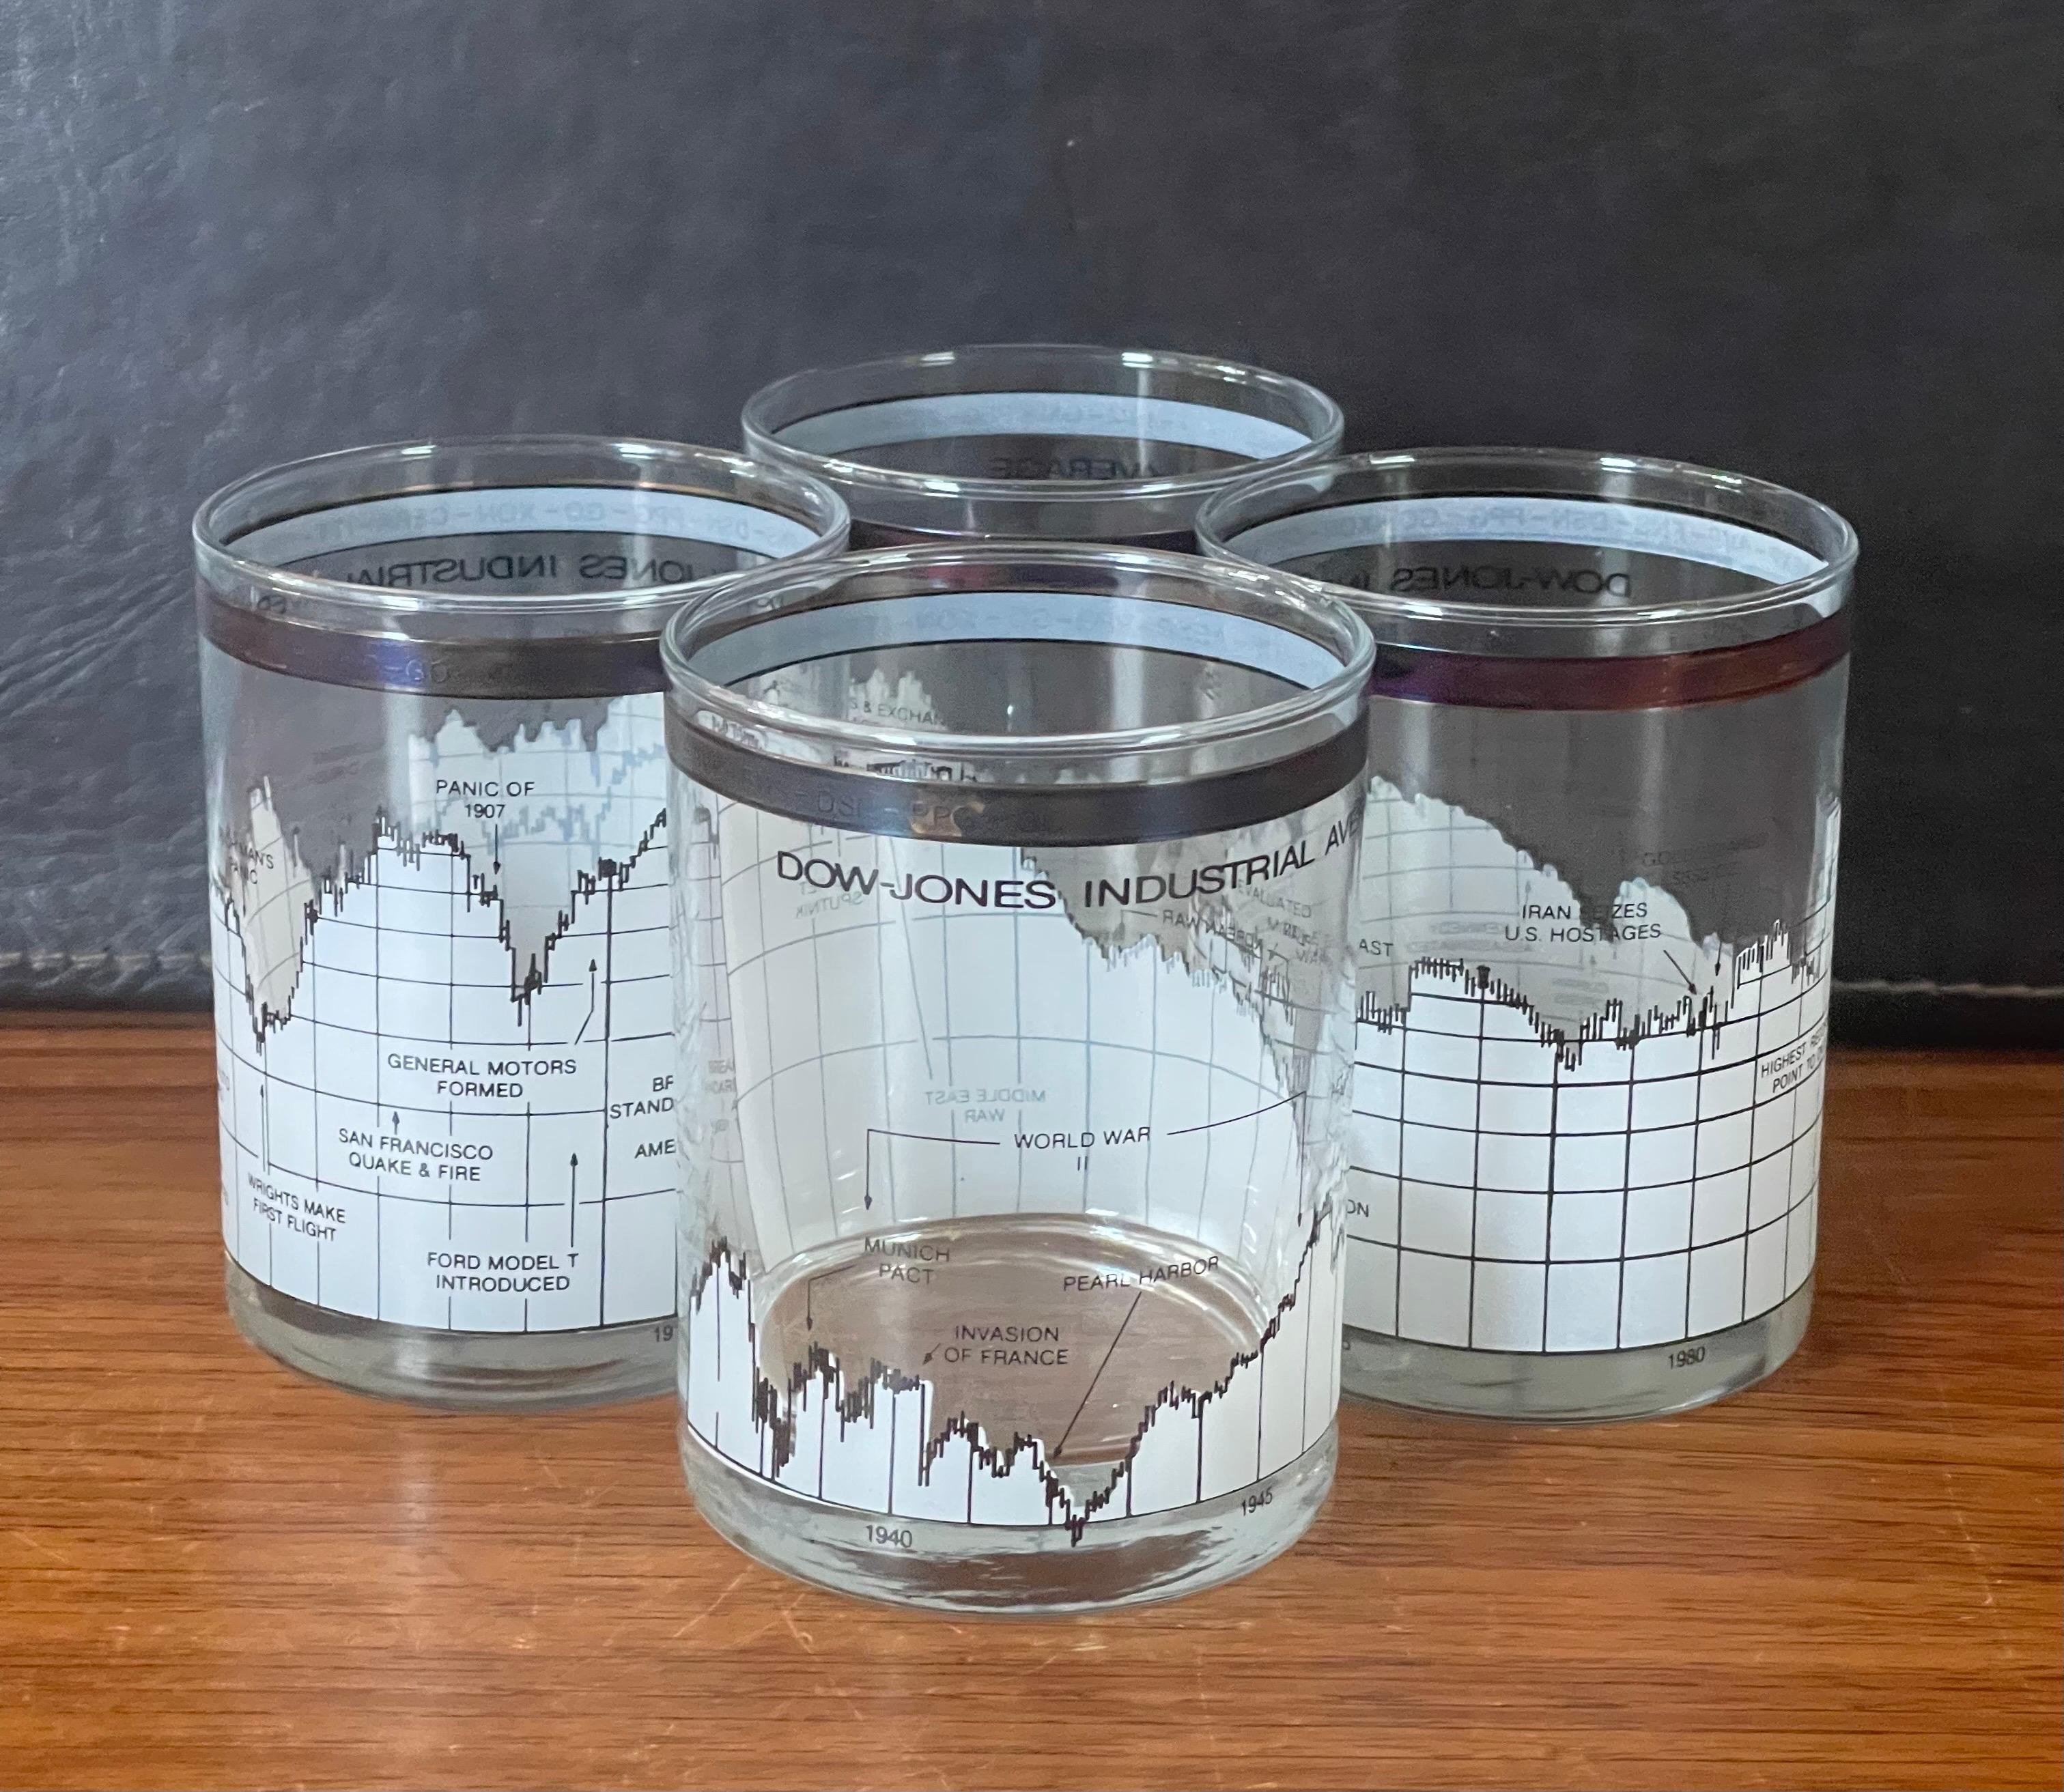 Great set of four double old fashioned glasses (14oz) tracking the Dow Jones Industrial Average (DJIA) from 1890s to 1980s by Cera. Each glass is different and captures 20 to 30 years of current events and their impact on the stock market. The